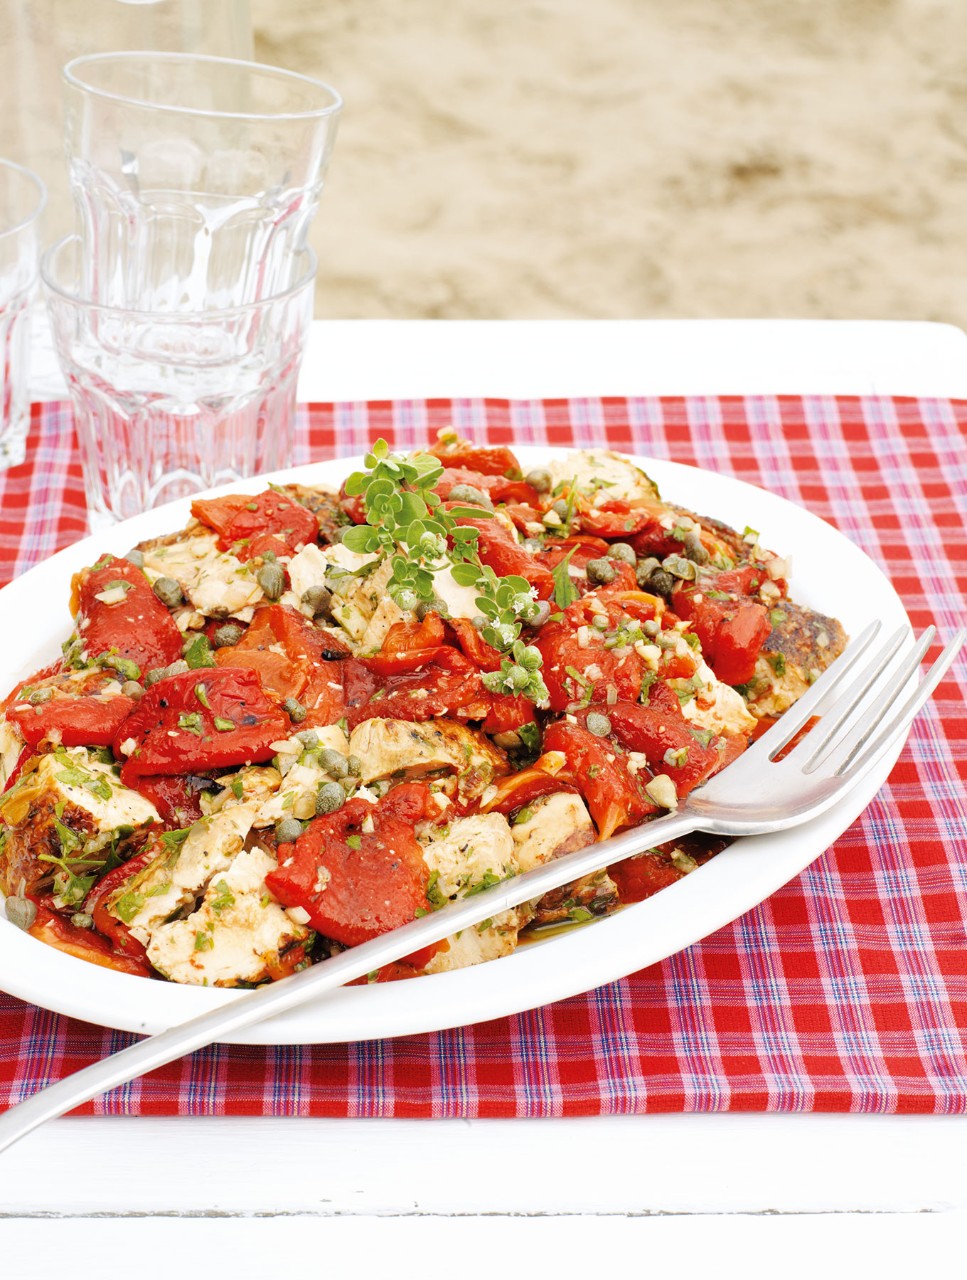 Roasted Pepper Salad with Chicken